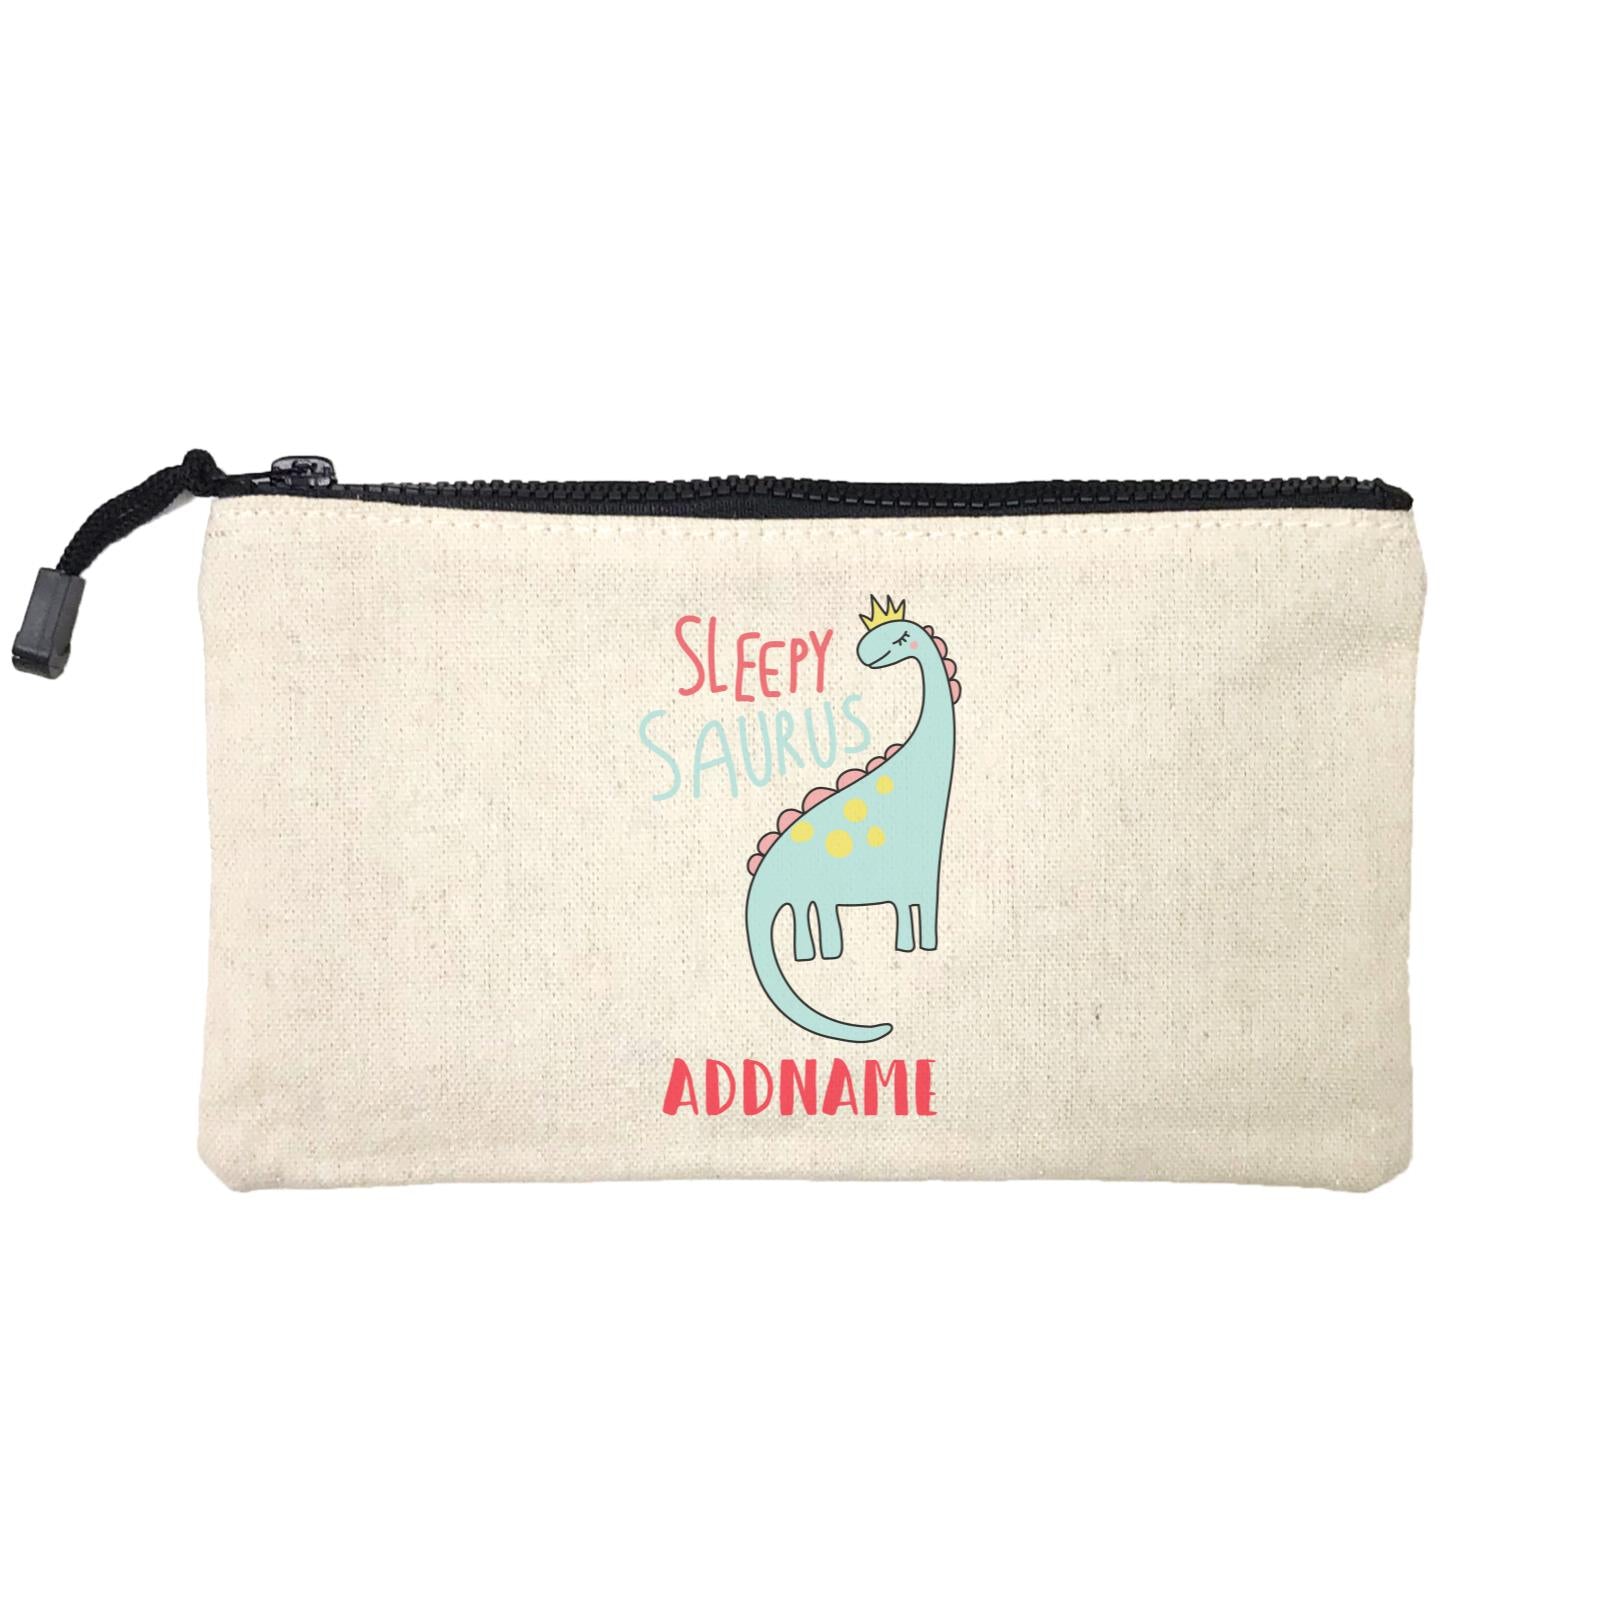 Cool Vibrant Series Sleepysaurus Addname Mini Accessories Stationery Pouch